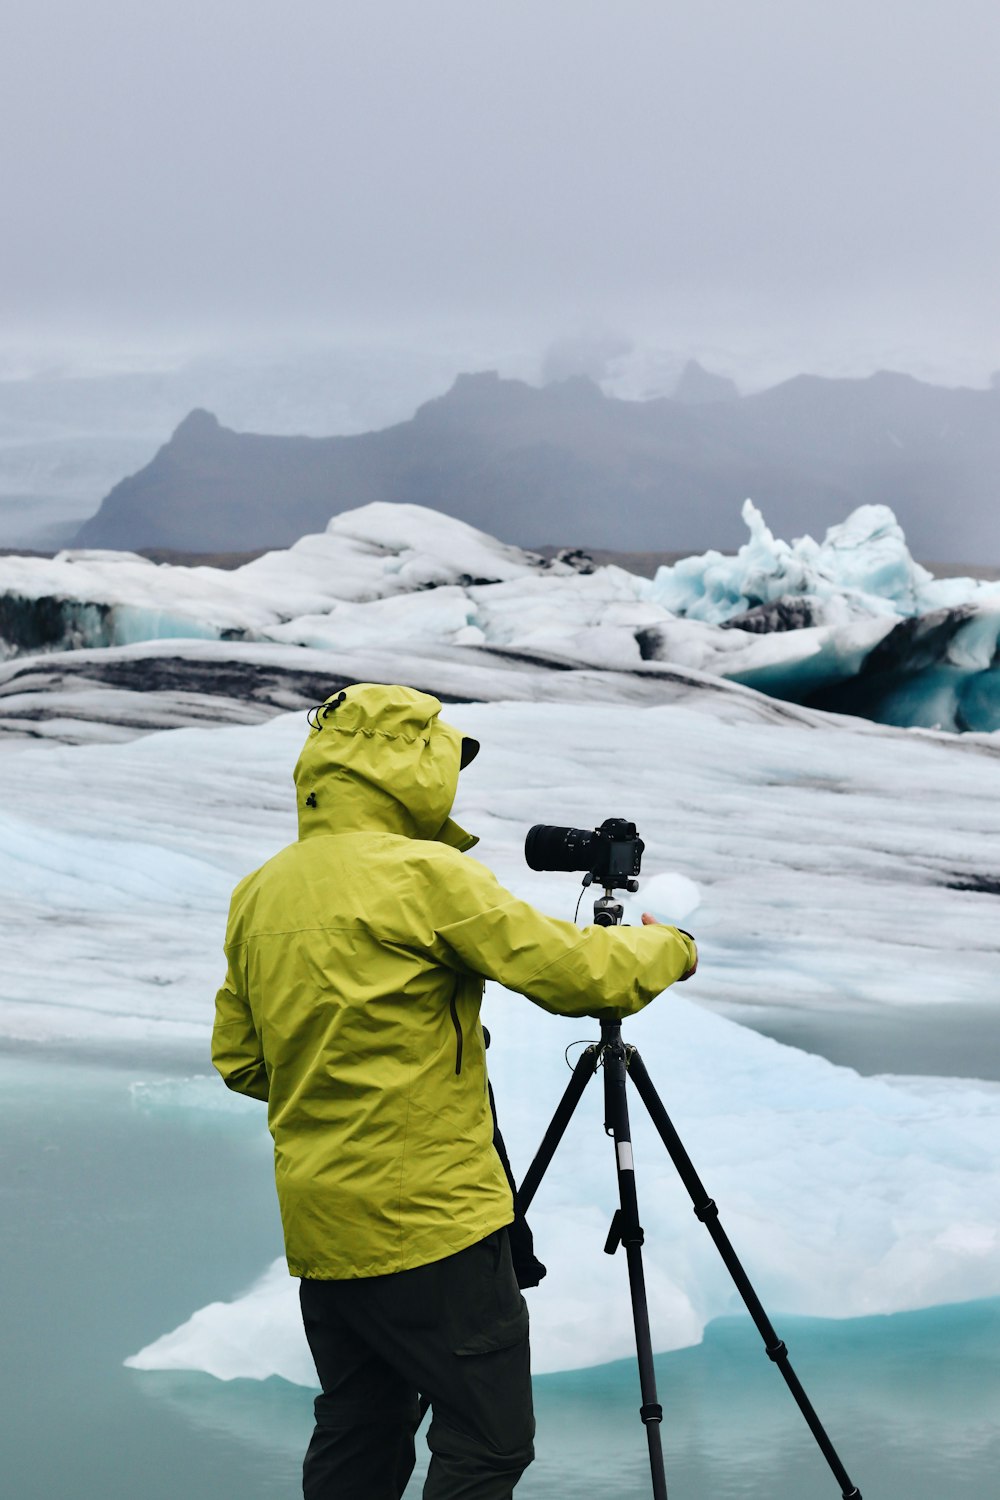 a person with a camera on a tripod in front of a snowy mountain